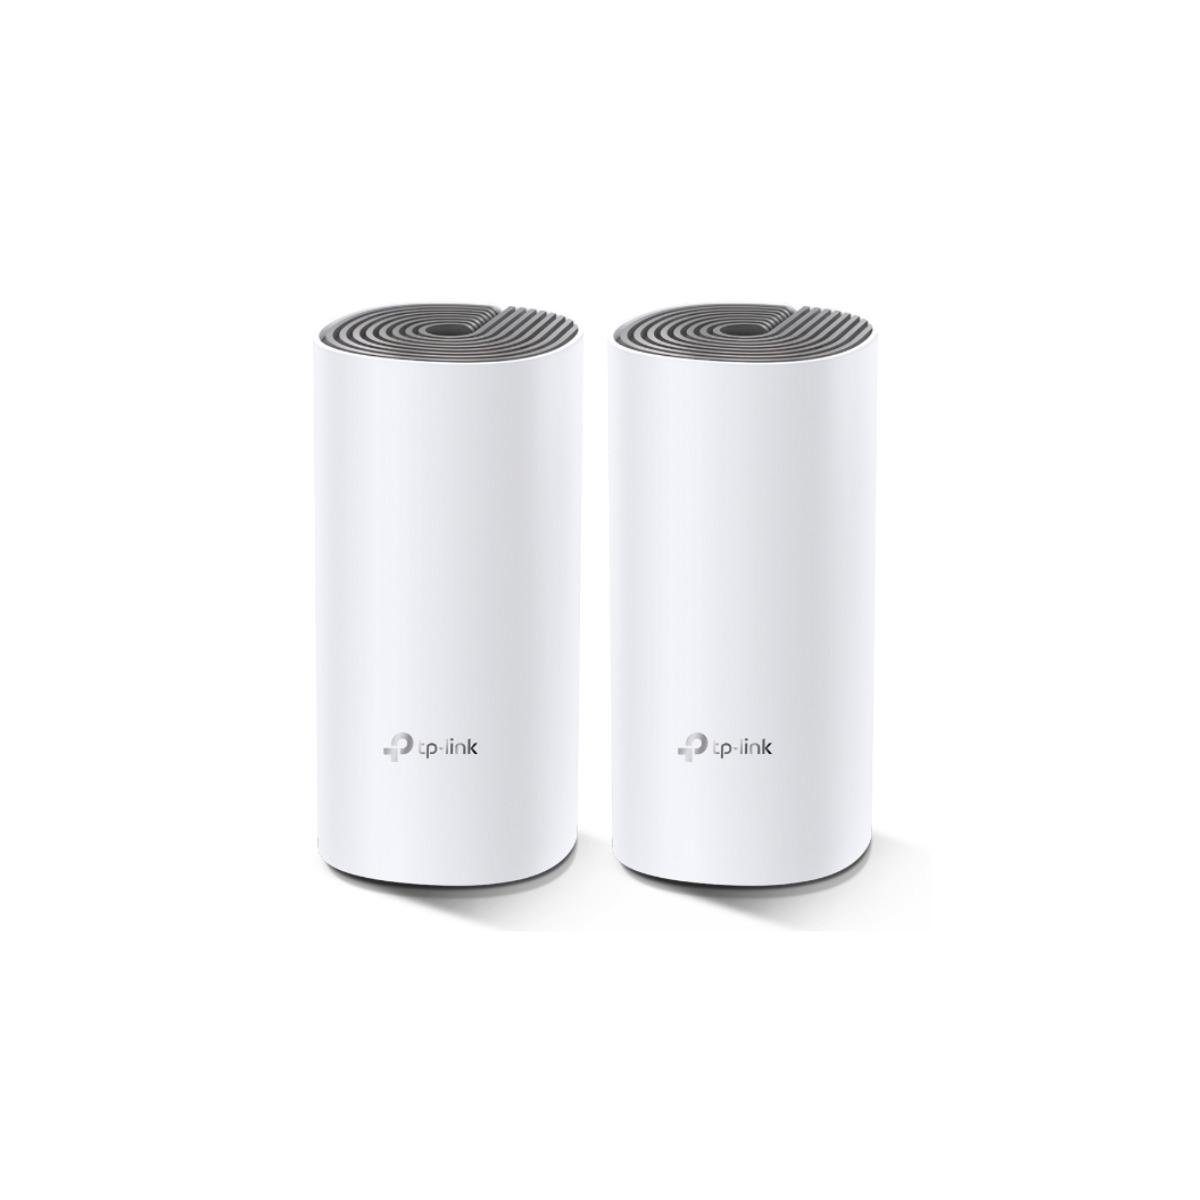 TP-Link DECO E4 (2-PACK) - Deco E4 - AC1200 Mesh Wi-Fi-System... WLAN-Access Point